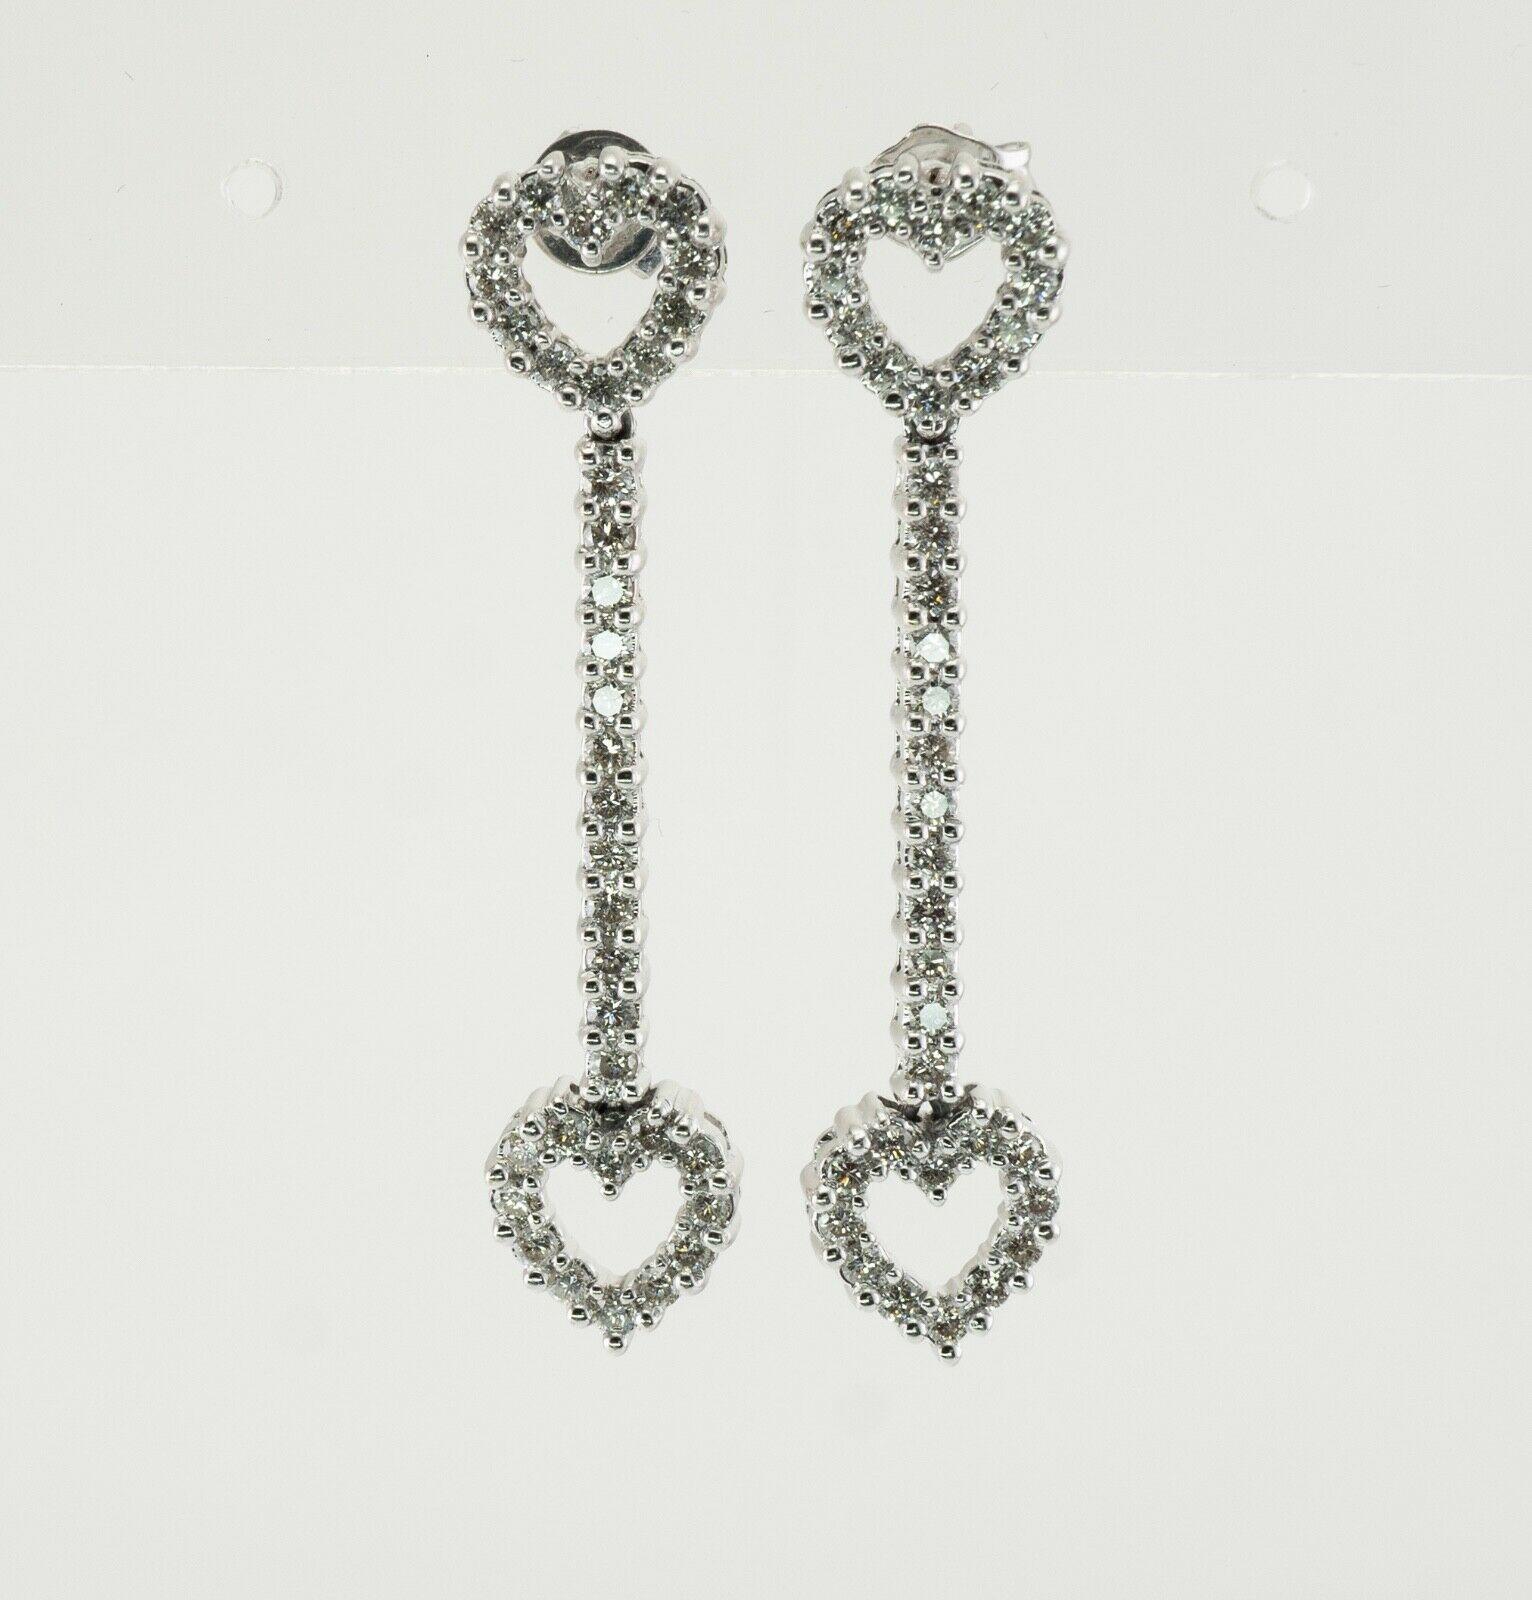 Heart Diamond Earrings 14K White Gold Dangle 1.44 TDW

These gorgeous earrings are crafted in solid 14K White gold (carefully tested and guaranteed). Each earring holds 36 round brilliant cut diamonds. The diamonds are SI1-SI2 clarity and H color